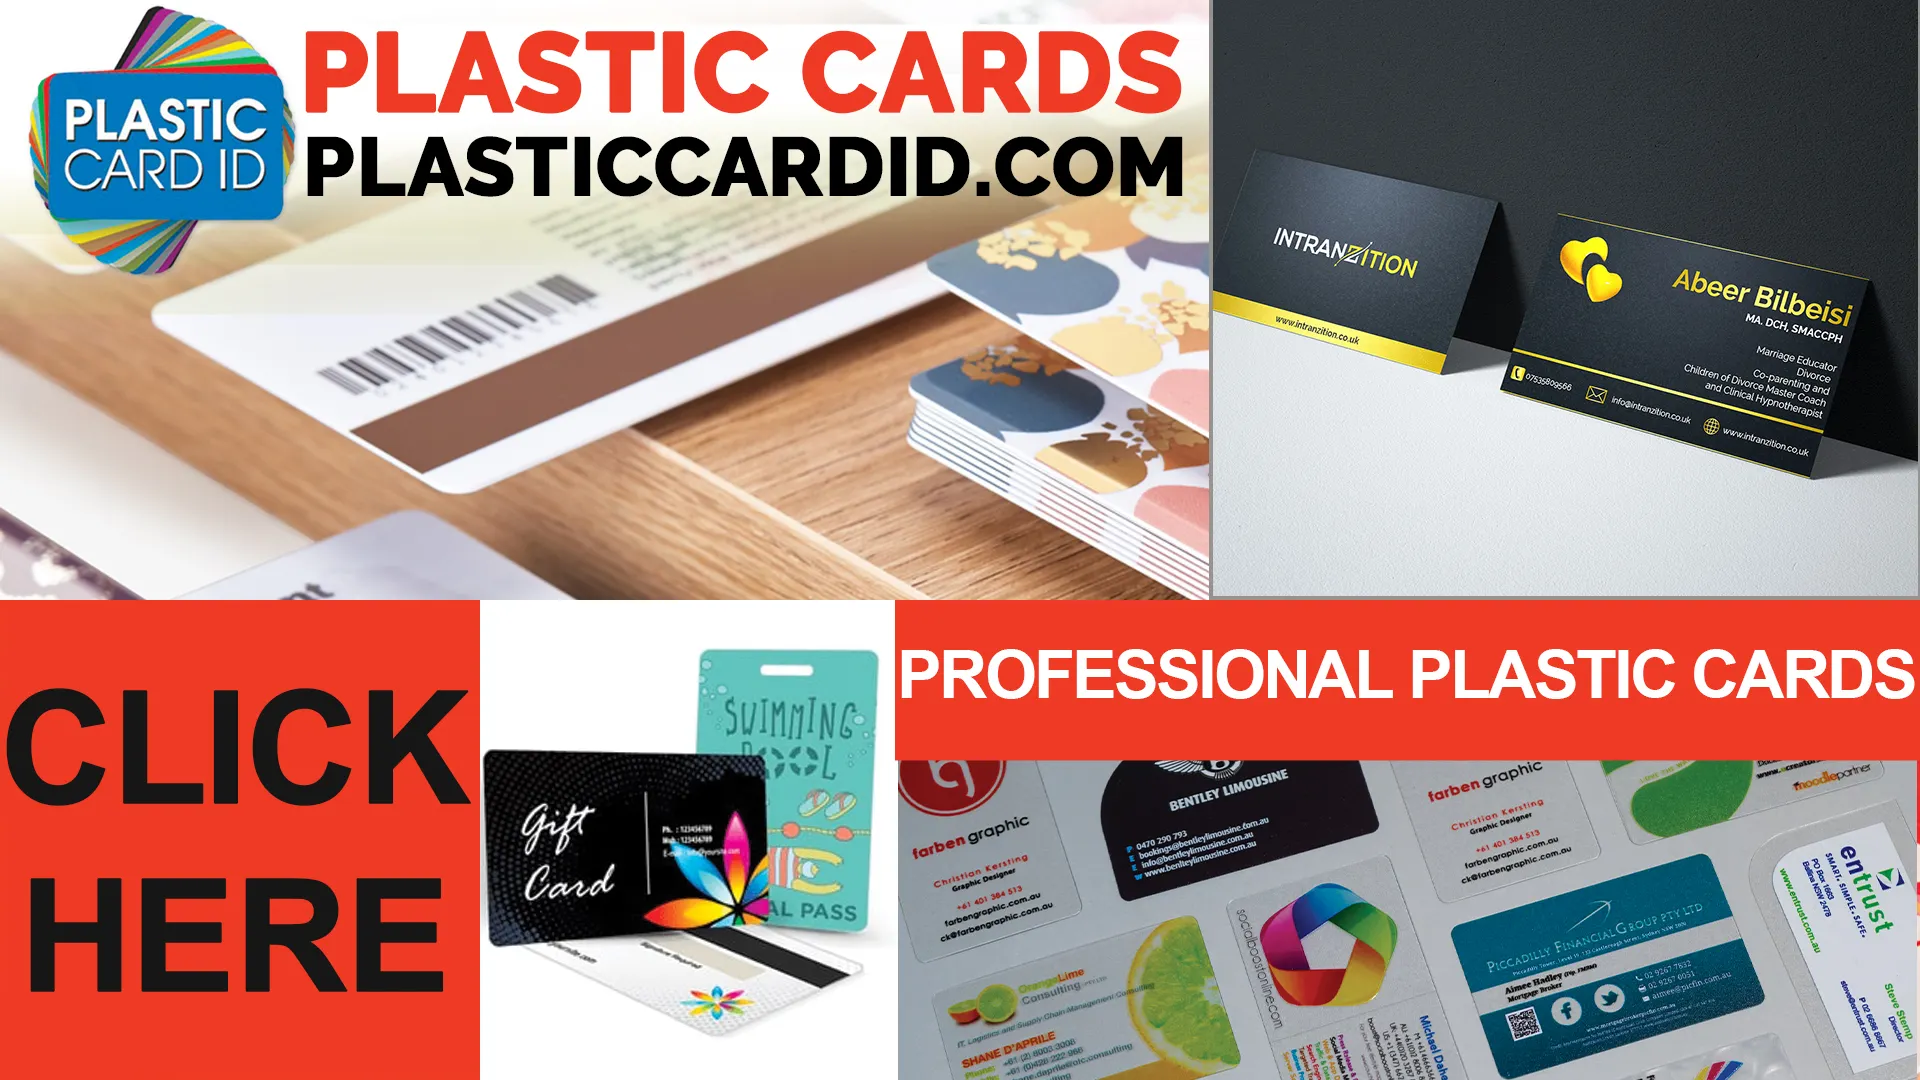 Welcome to the World of Plastic Cards